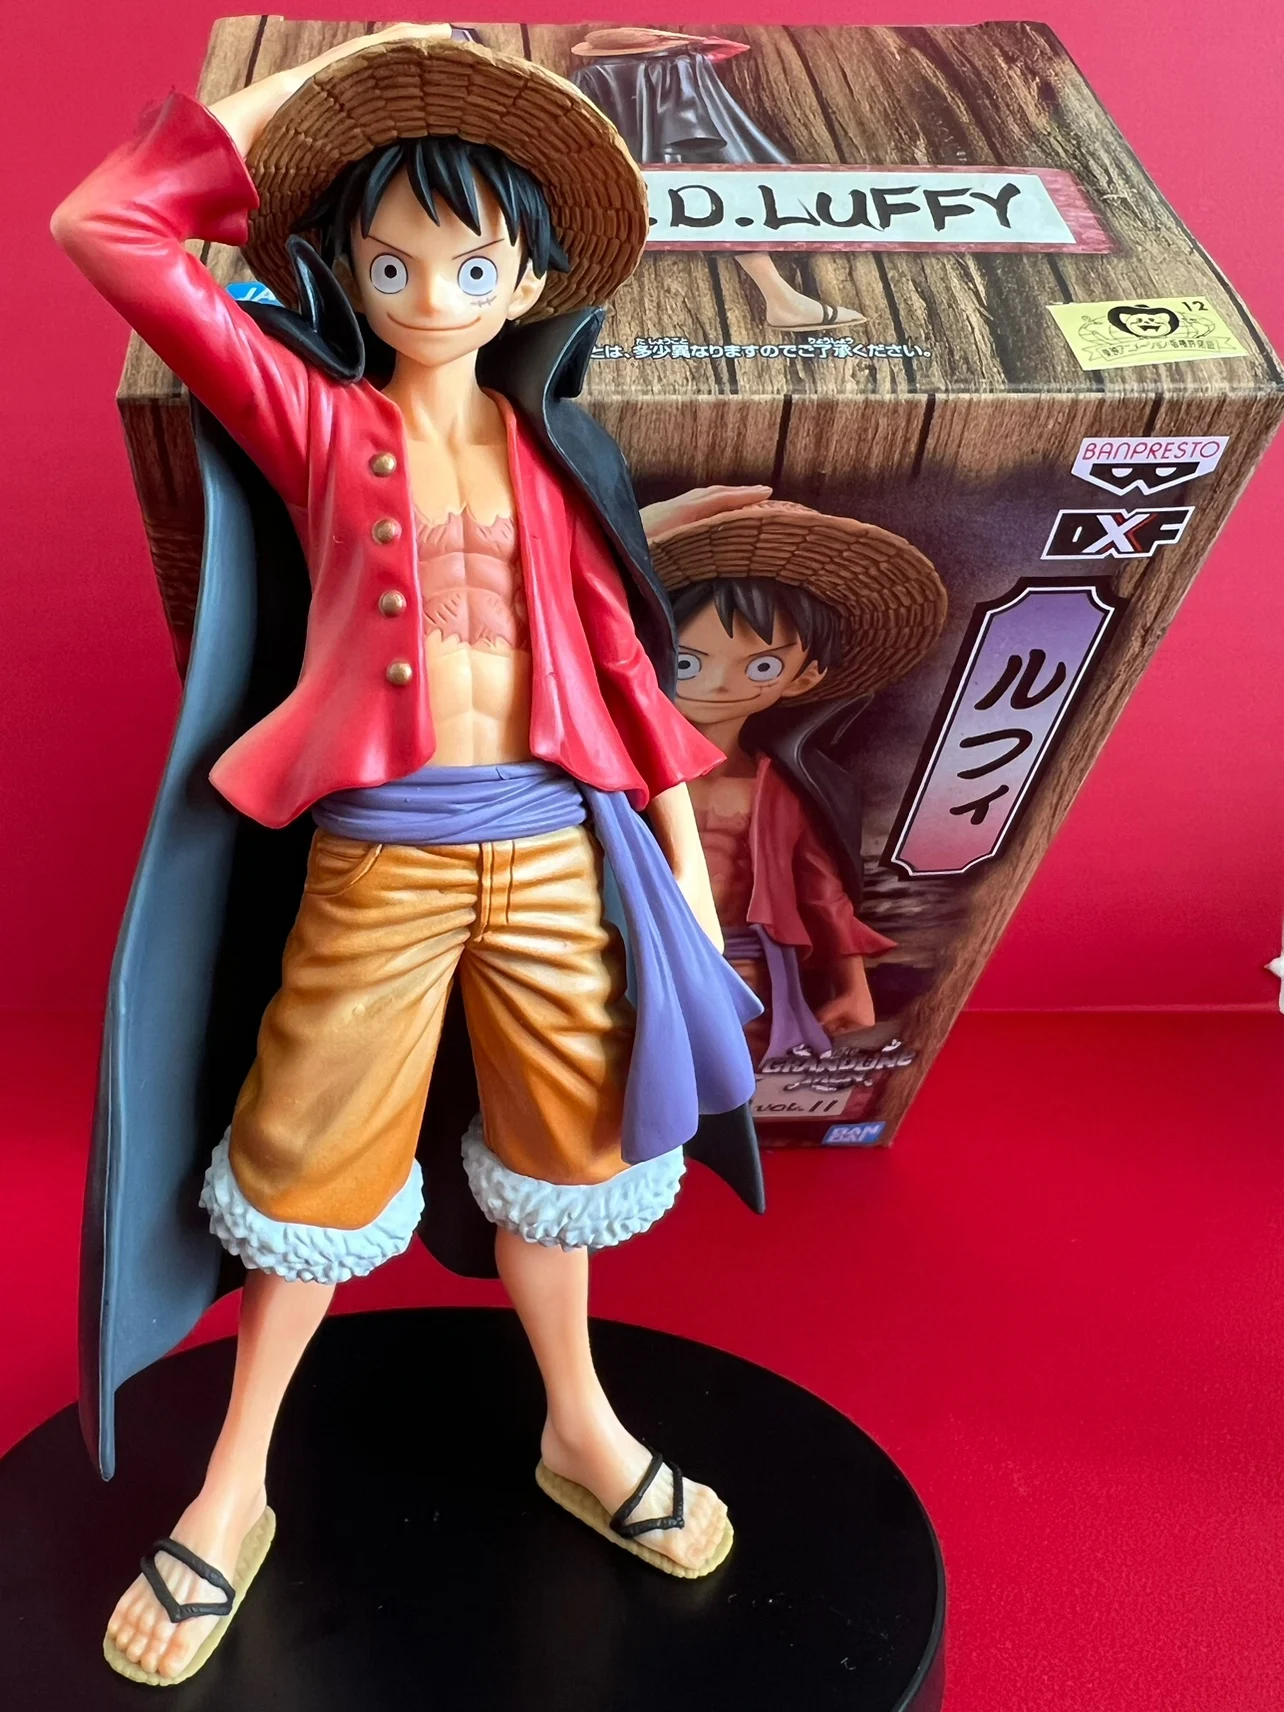 

16cm Original Japanese Version One Piece DXF Wano Country Straw Hat Luffy Black Cloak Anime Collectable Model for kids gift